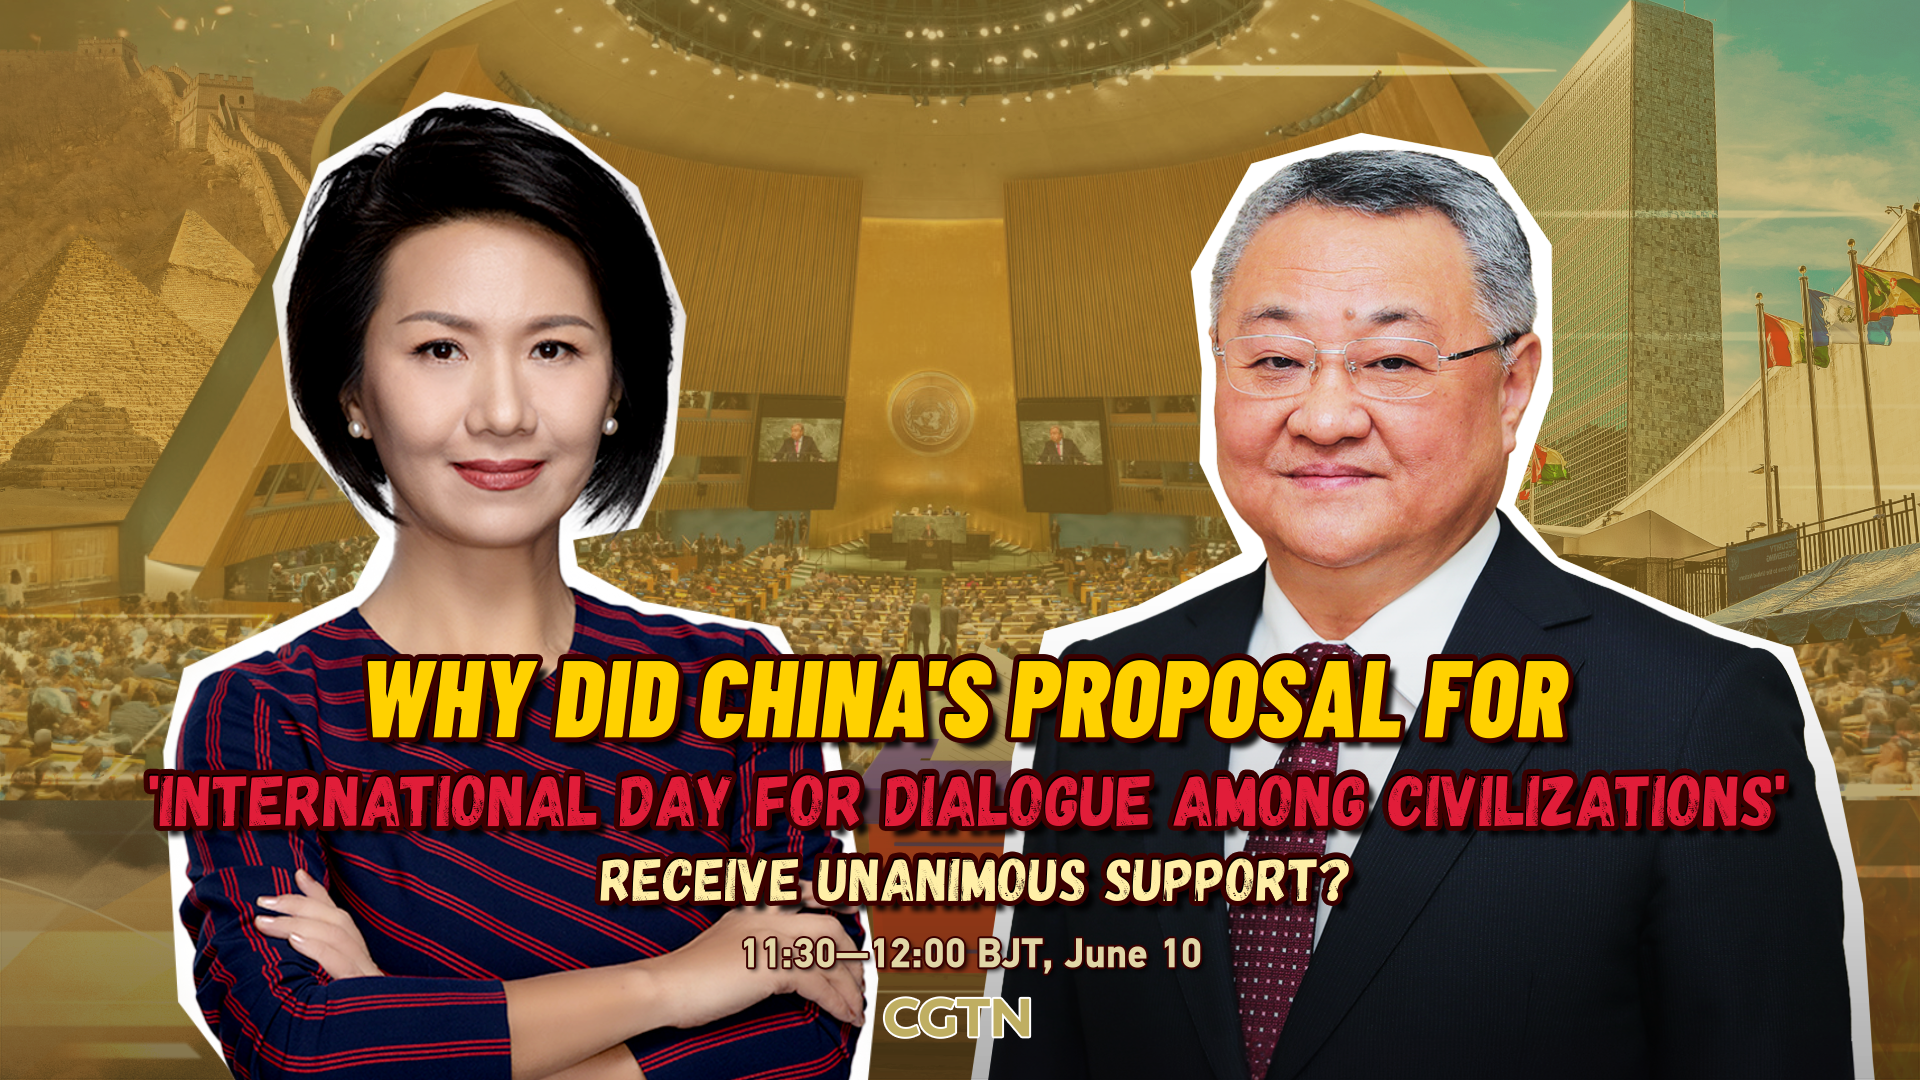 Watch: Why did China's proposal for International Day for Dialogue among Civilizations receive unanimous support?